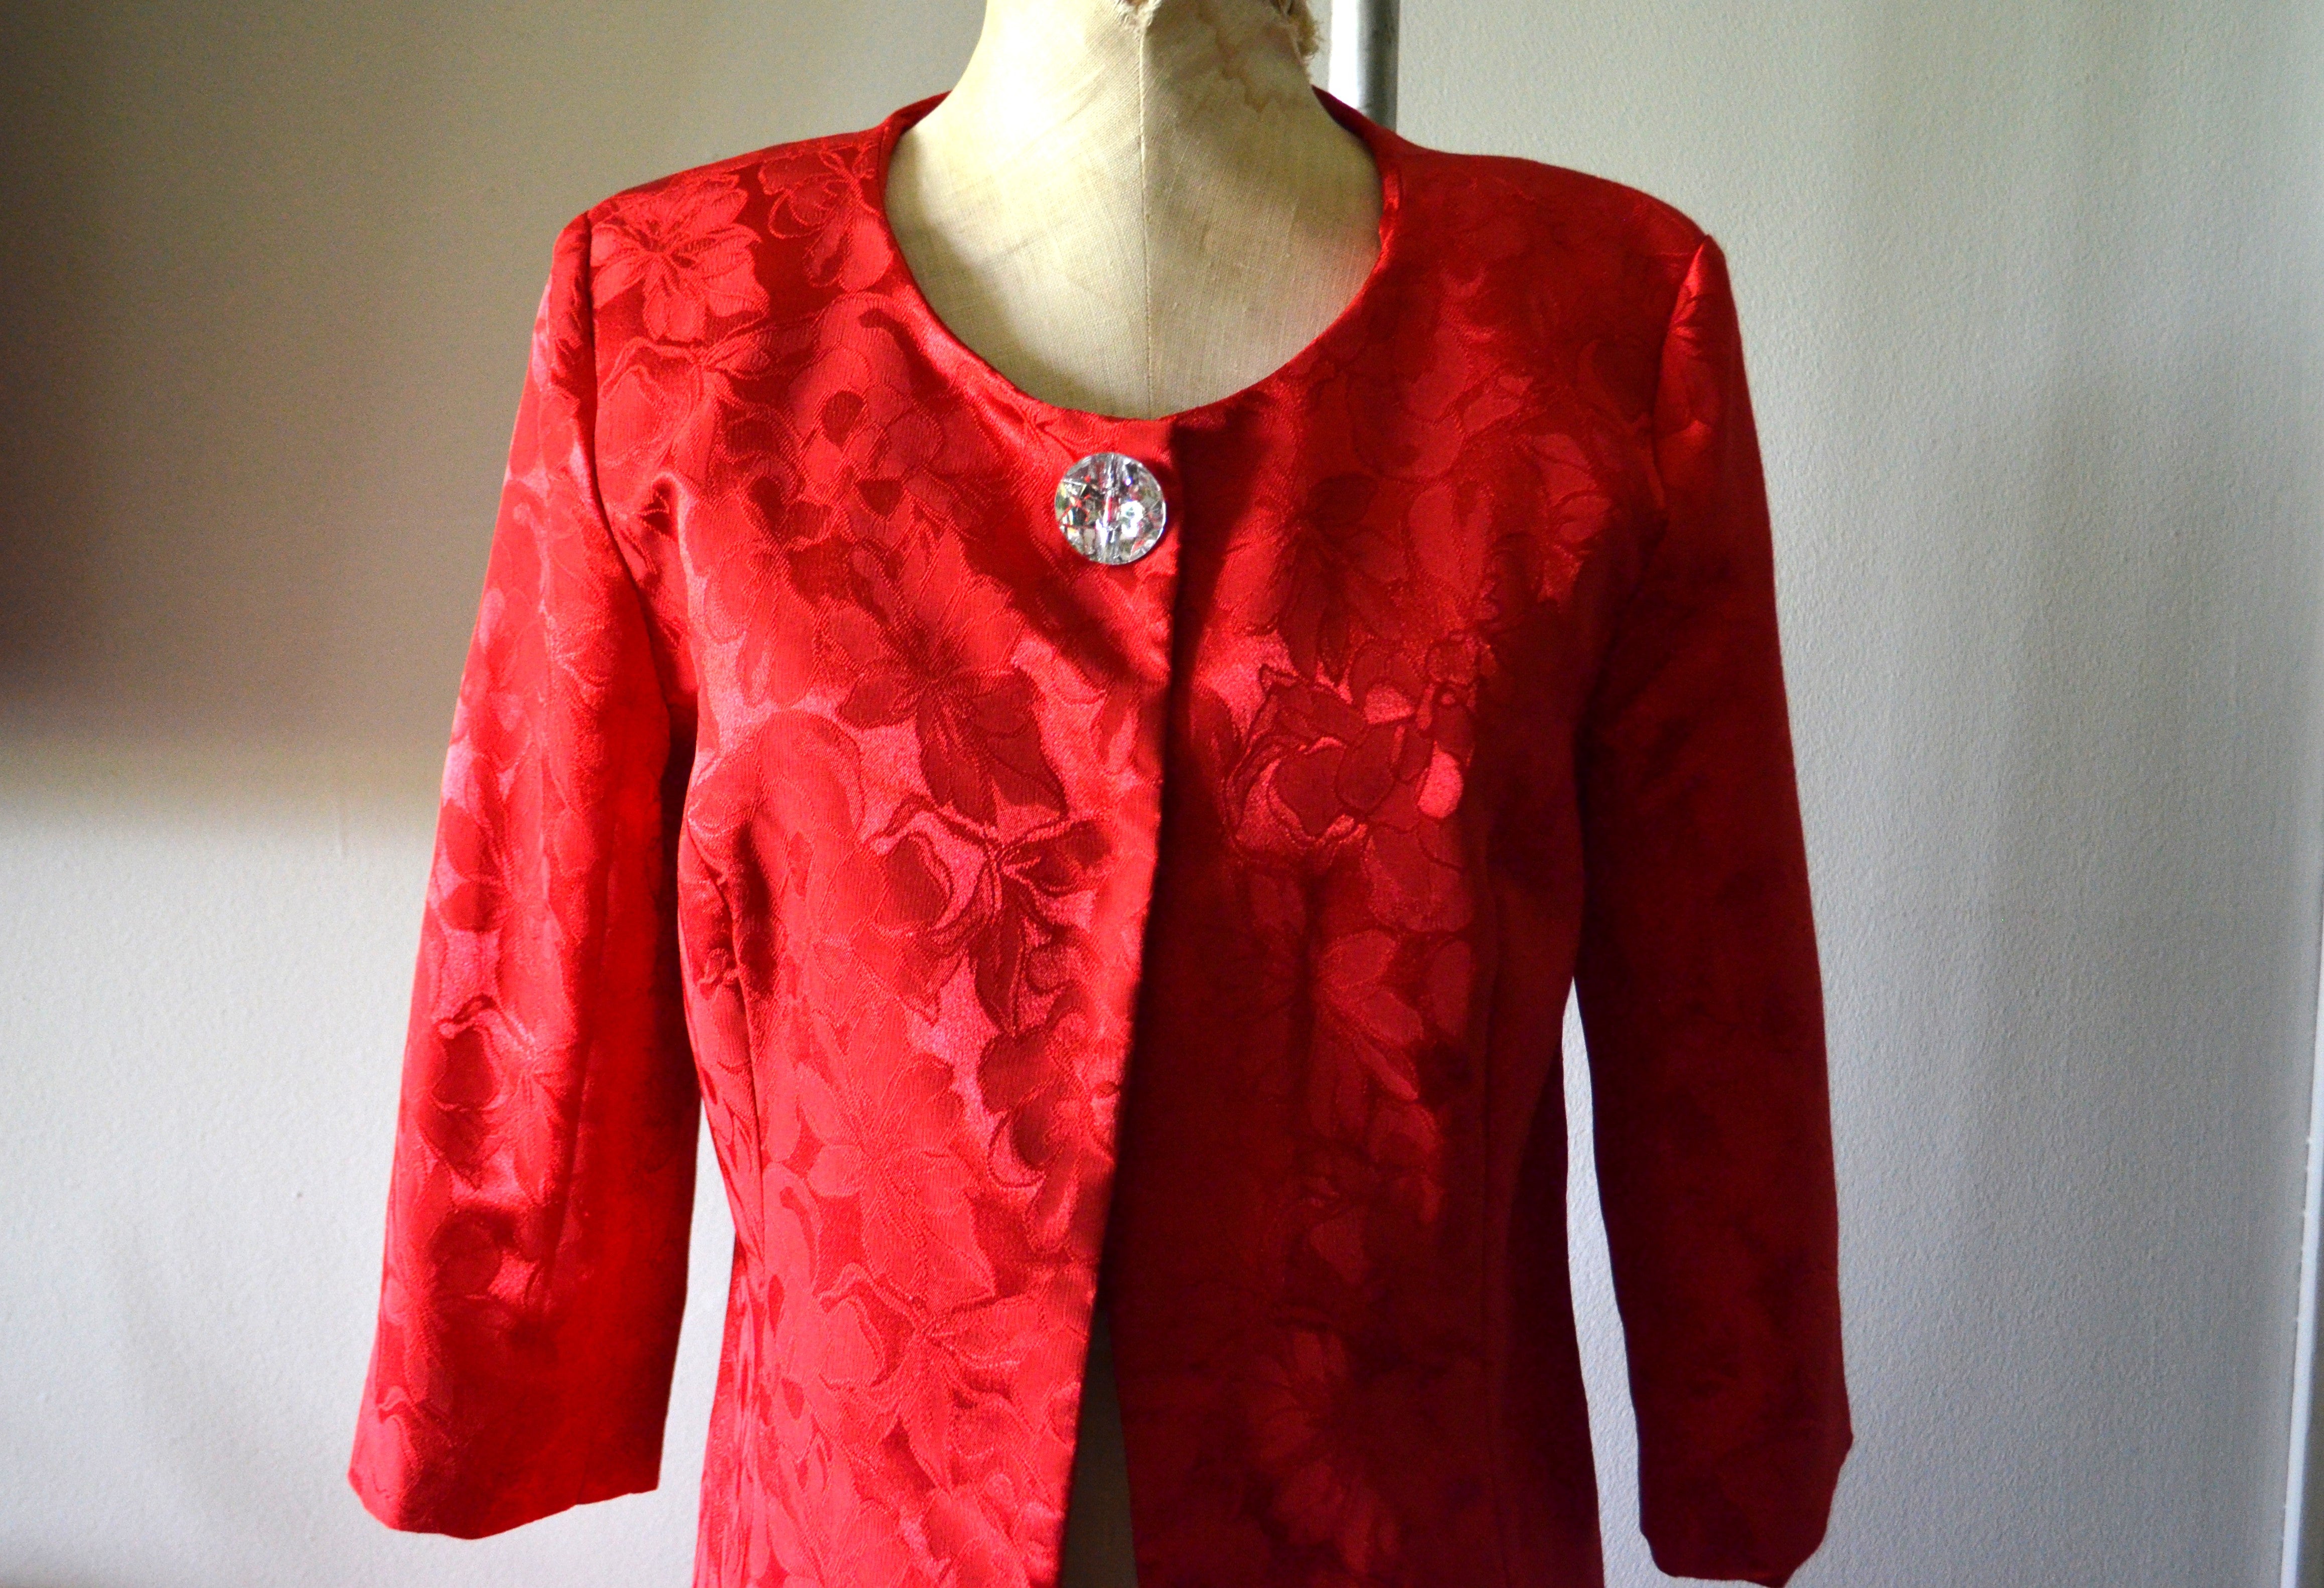 Vintage 1980s Red Lipstick Brocade Swing Coat One Size